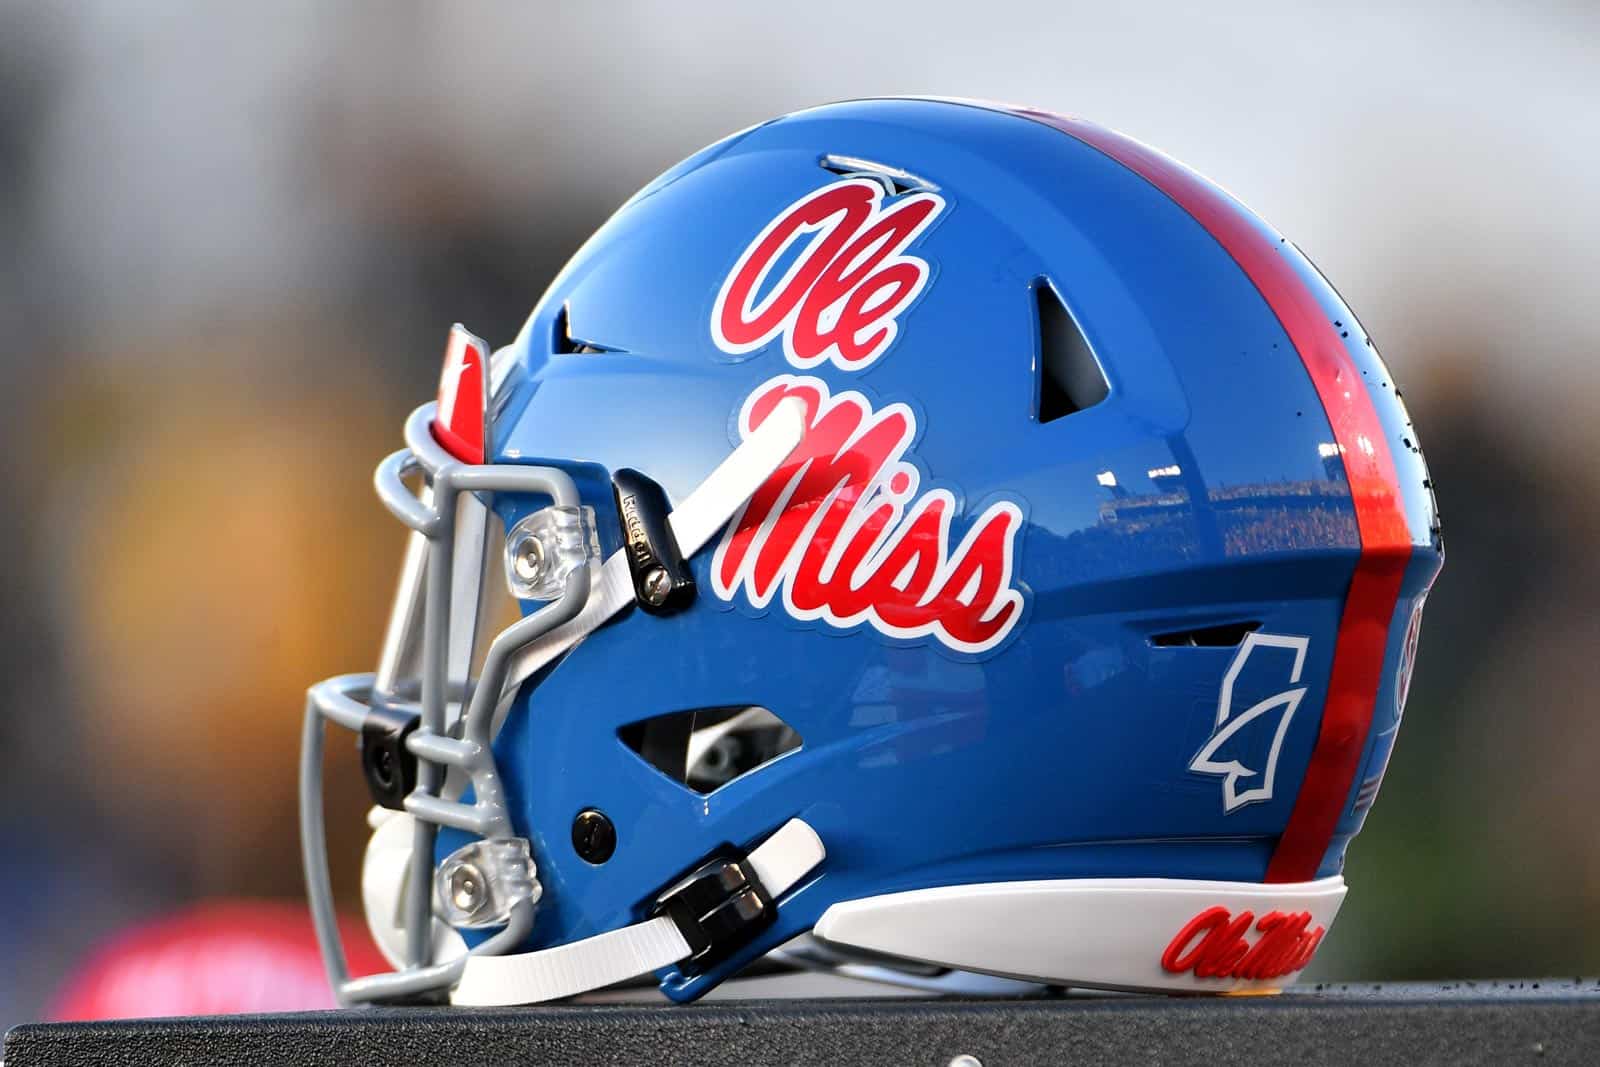 Ole Miss Among SEC Teams Fined for Violation of COVID-19 Protocols